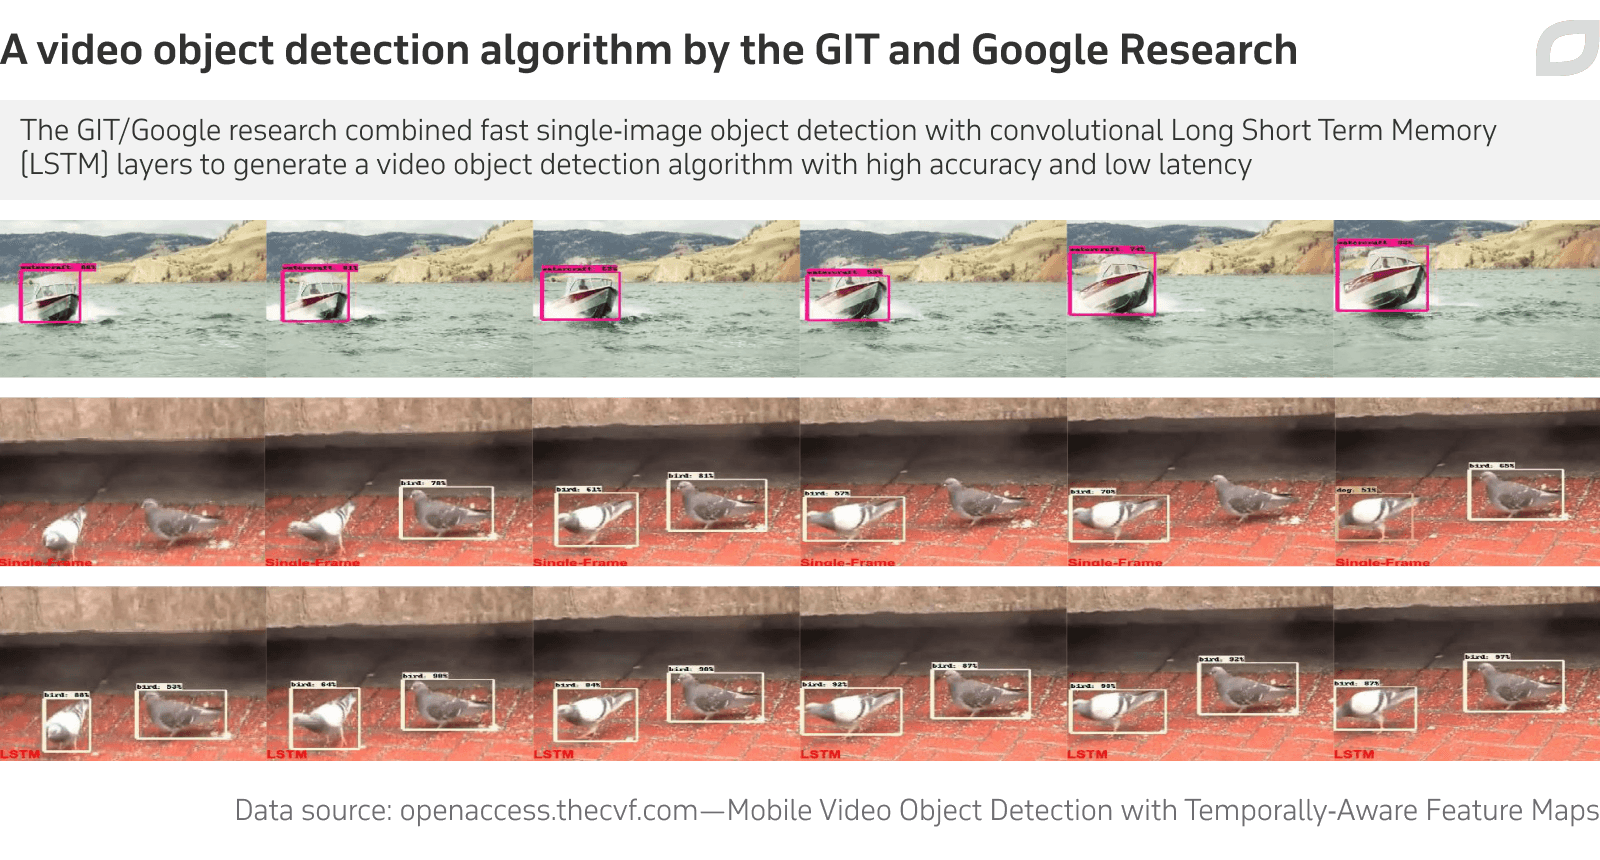 A video object detection algorithm by the GIT and Google Research